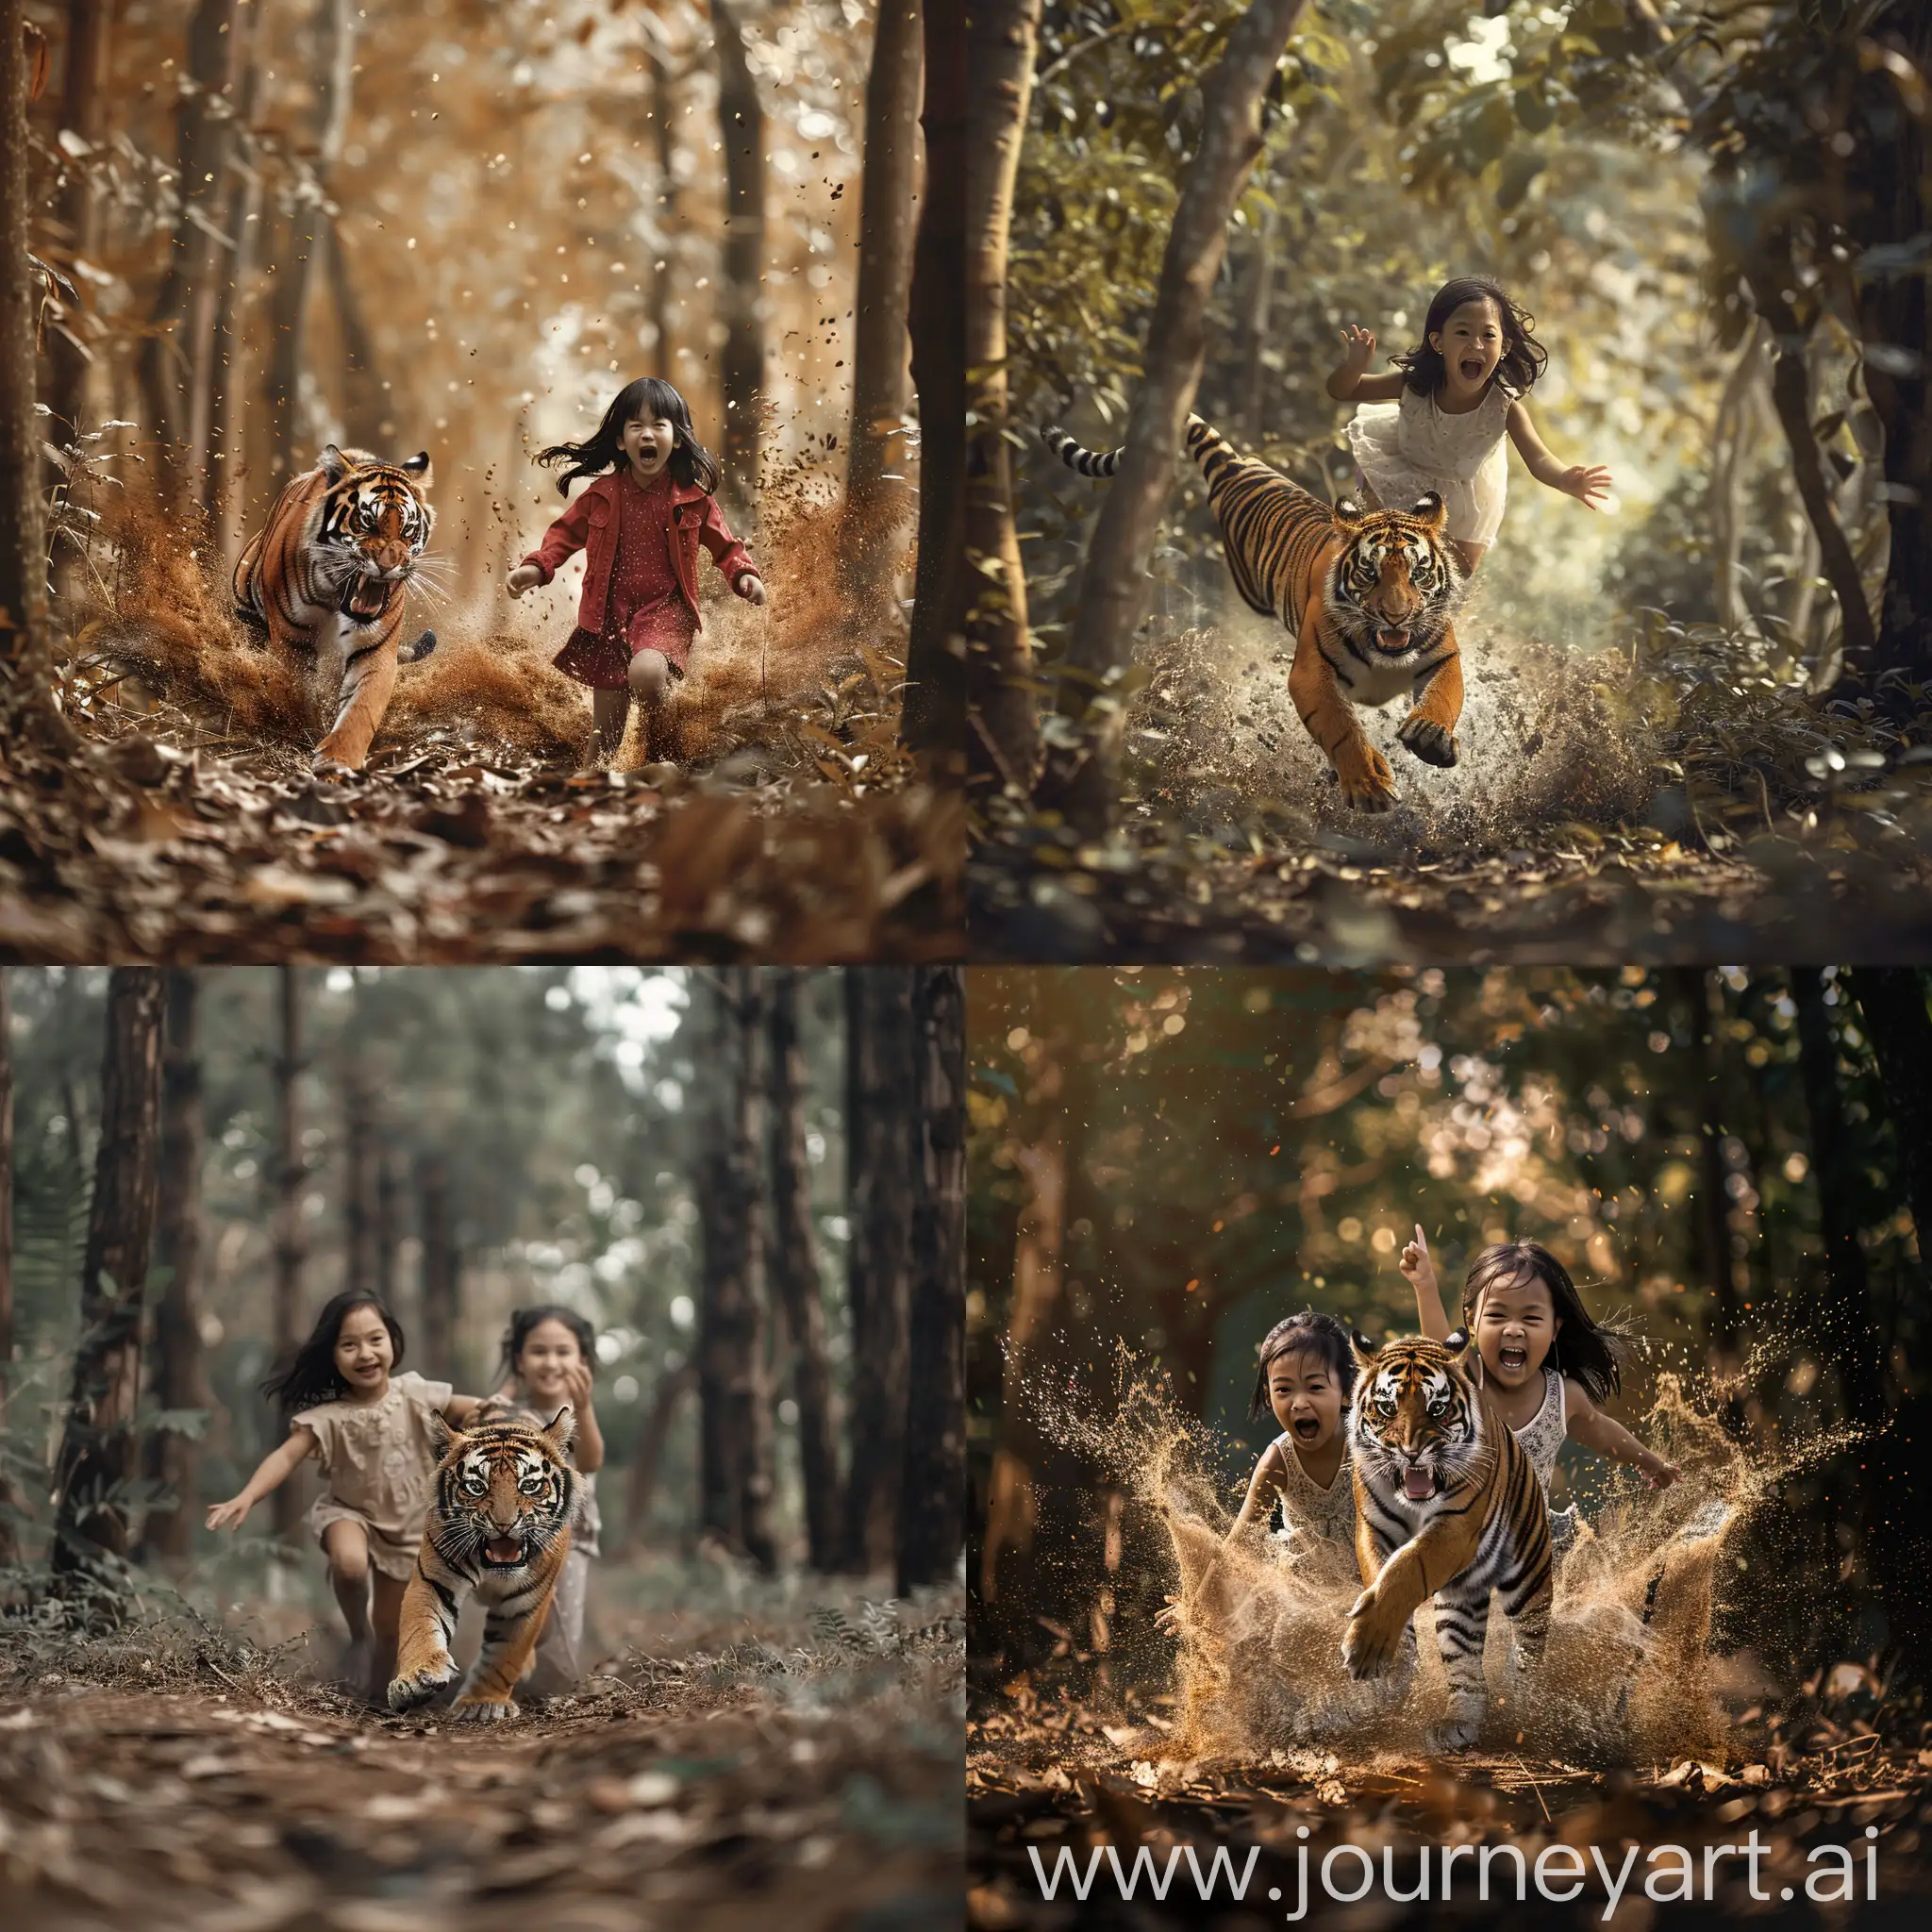 Fearful-Indonesian-Girls-Fleeing-Tiger-in-Dense-Forest-4D-Realistic-Photography